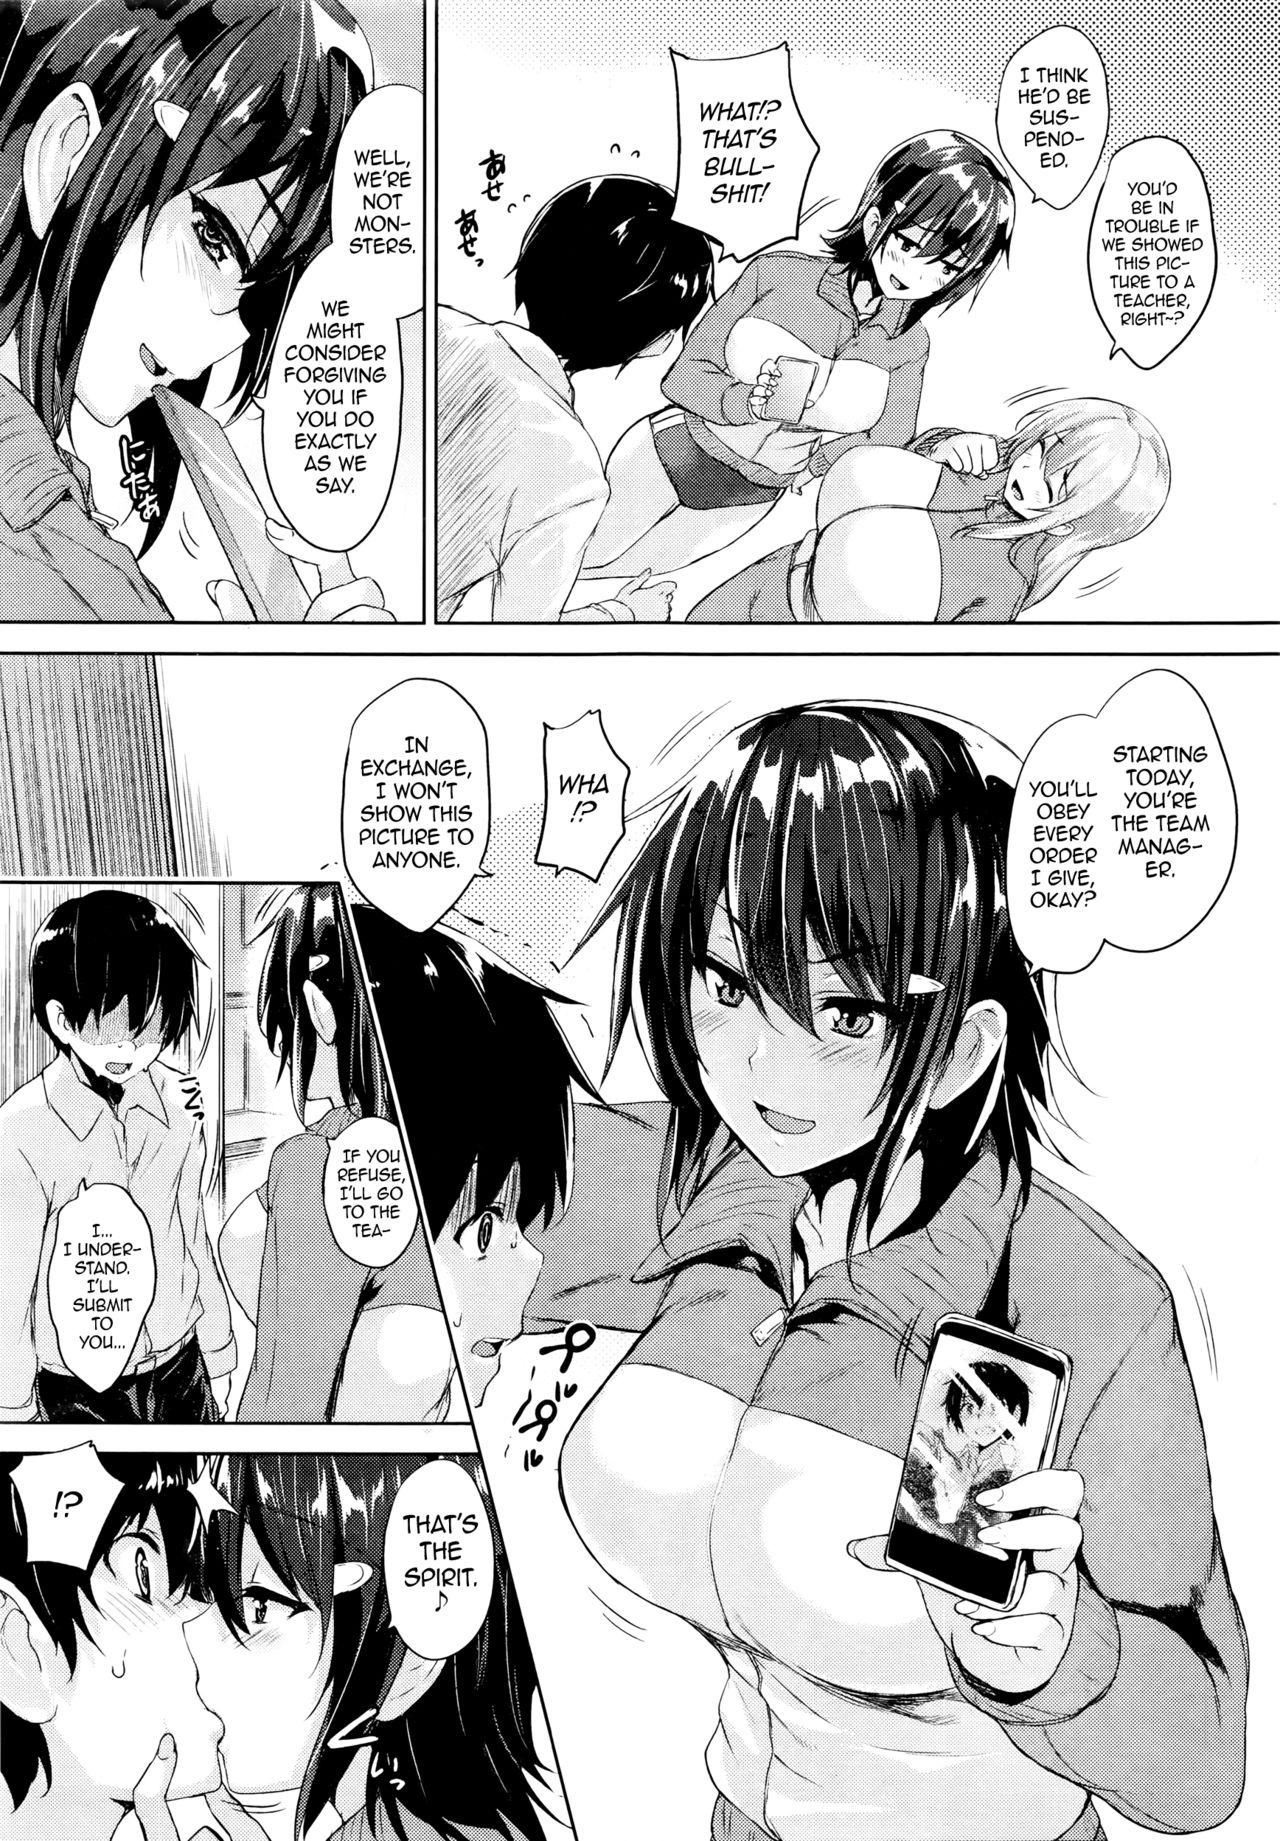 Suck Twin Ball Love Attack Ch. 1 High Heels - Page 5